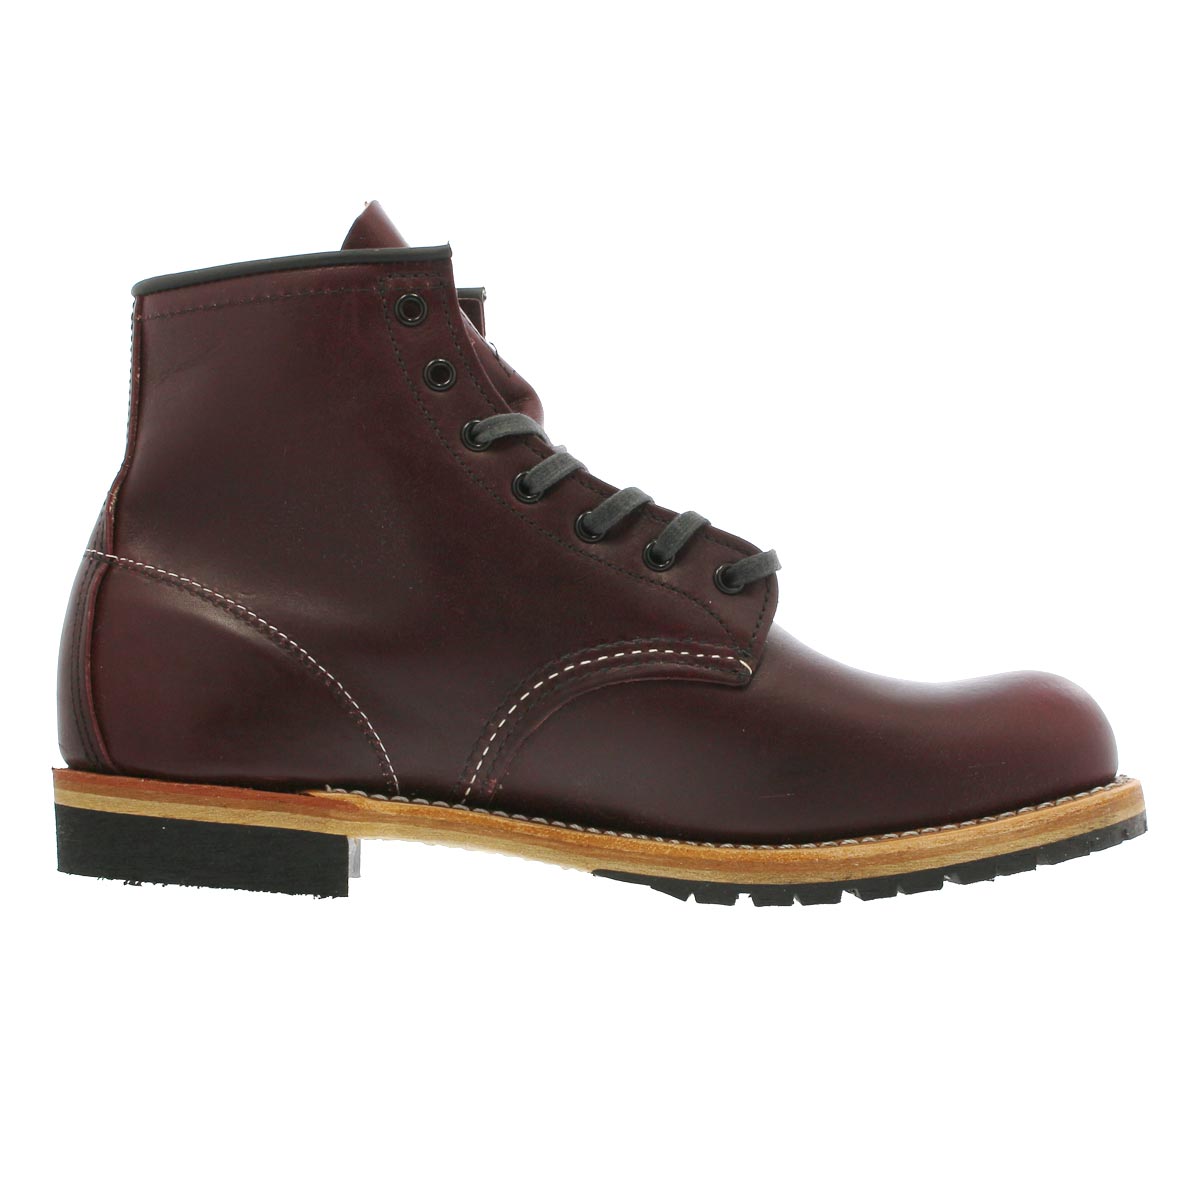 SELECT SHOP LOWTEX: RED WING BECKMAN BOOT ROUND TOE BLACK CHERRY 9011